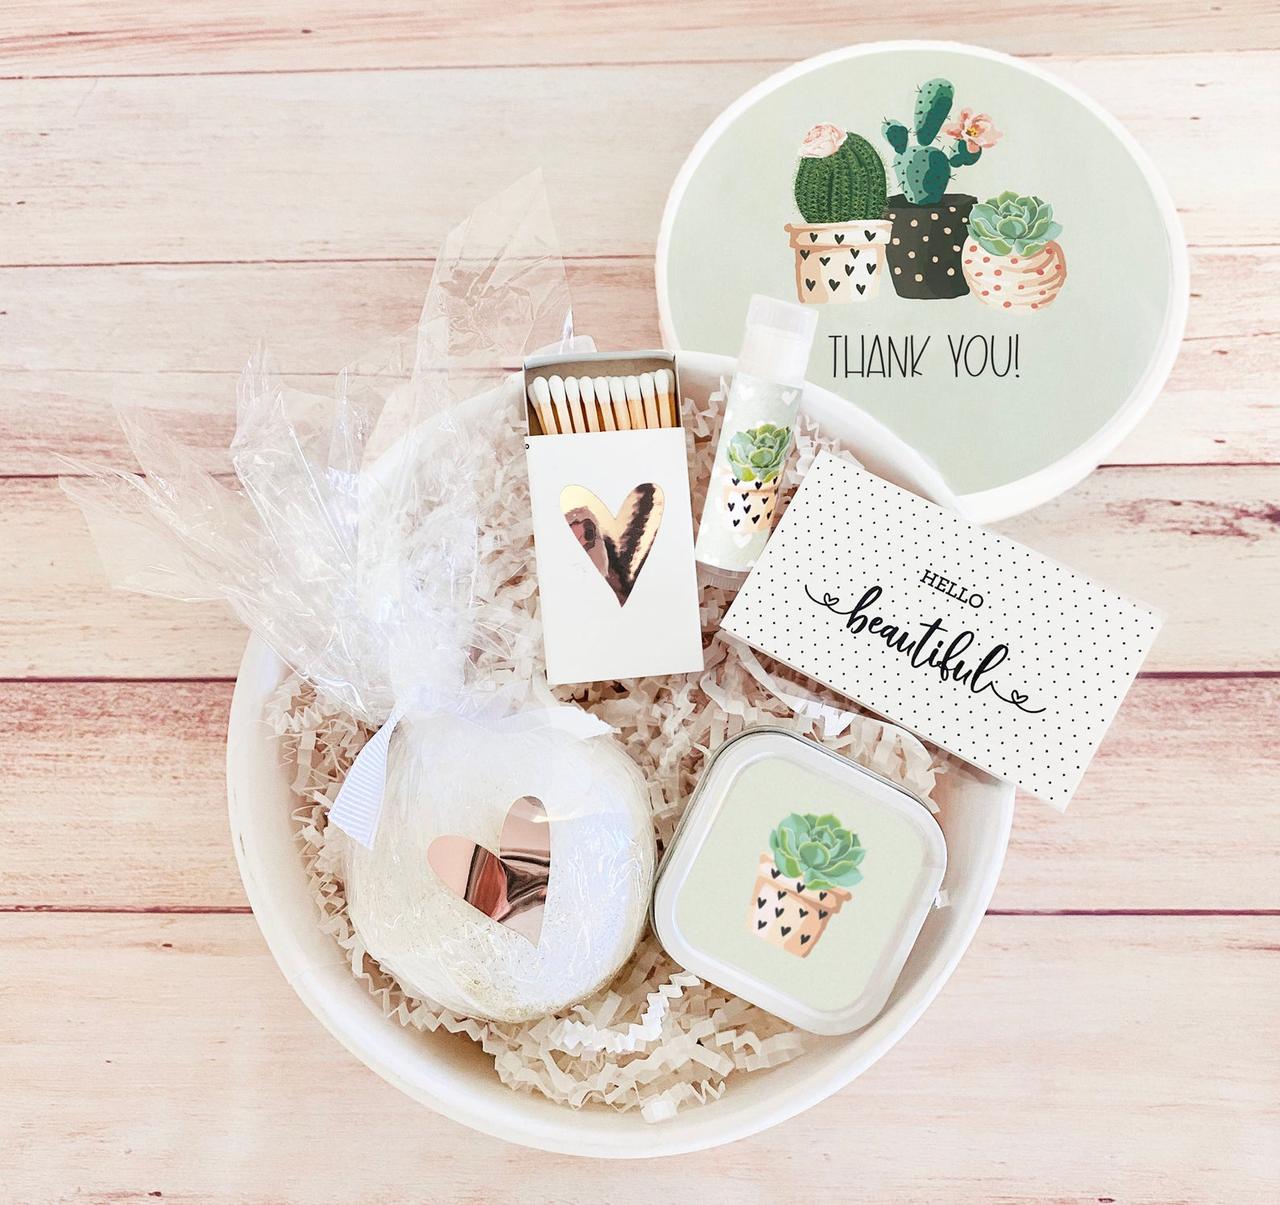 28 Last-Minute Bridal Shower Gifts They Actually Want